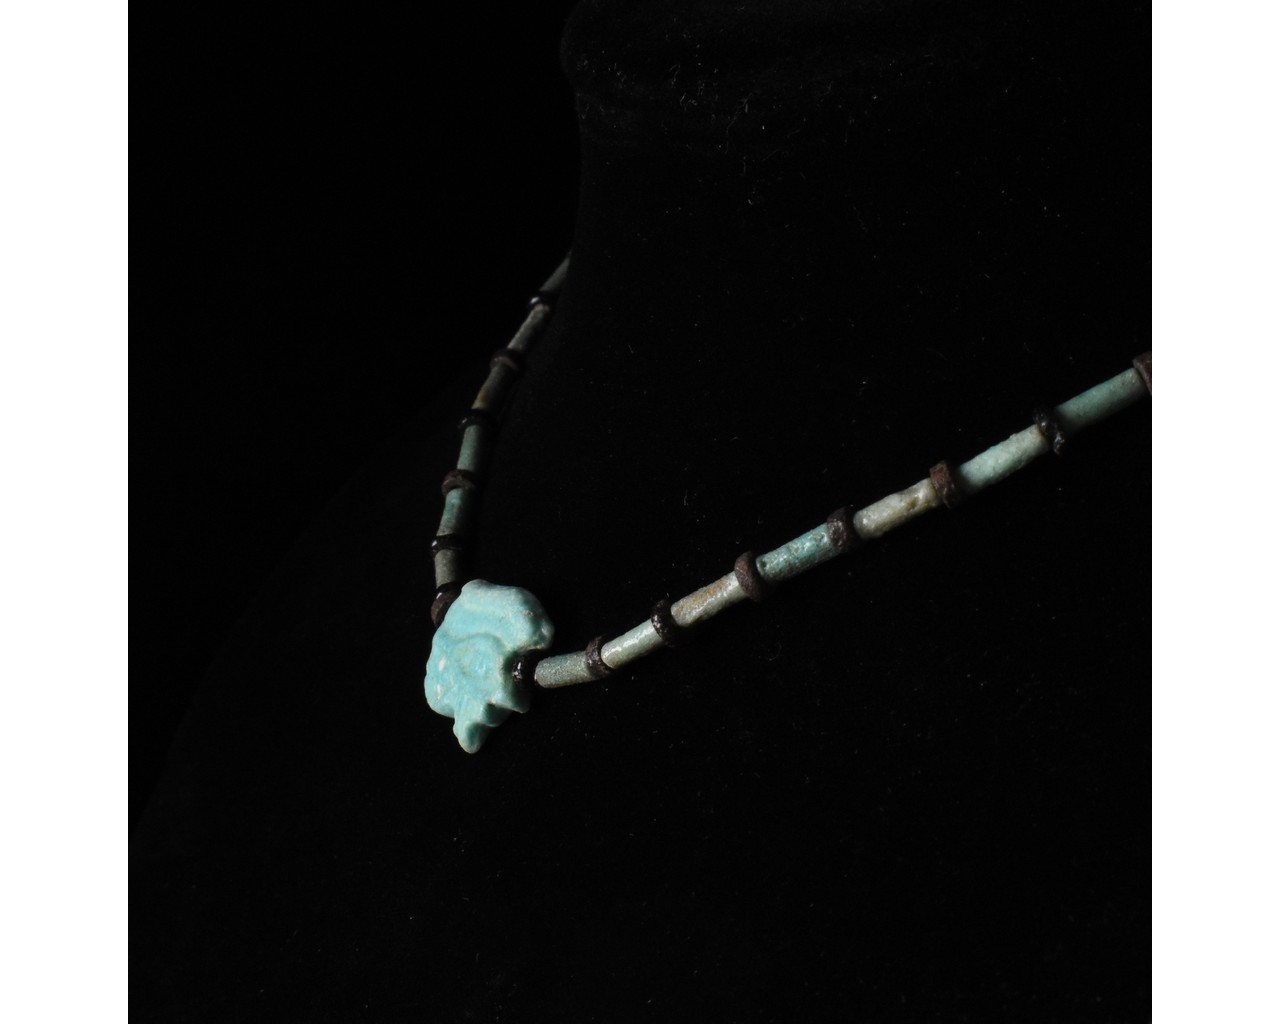 EGYPTIAN FAIENCE NECKLACE WITH EYE OF HORUS AMULET - Image 3 of 3